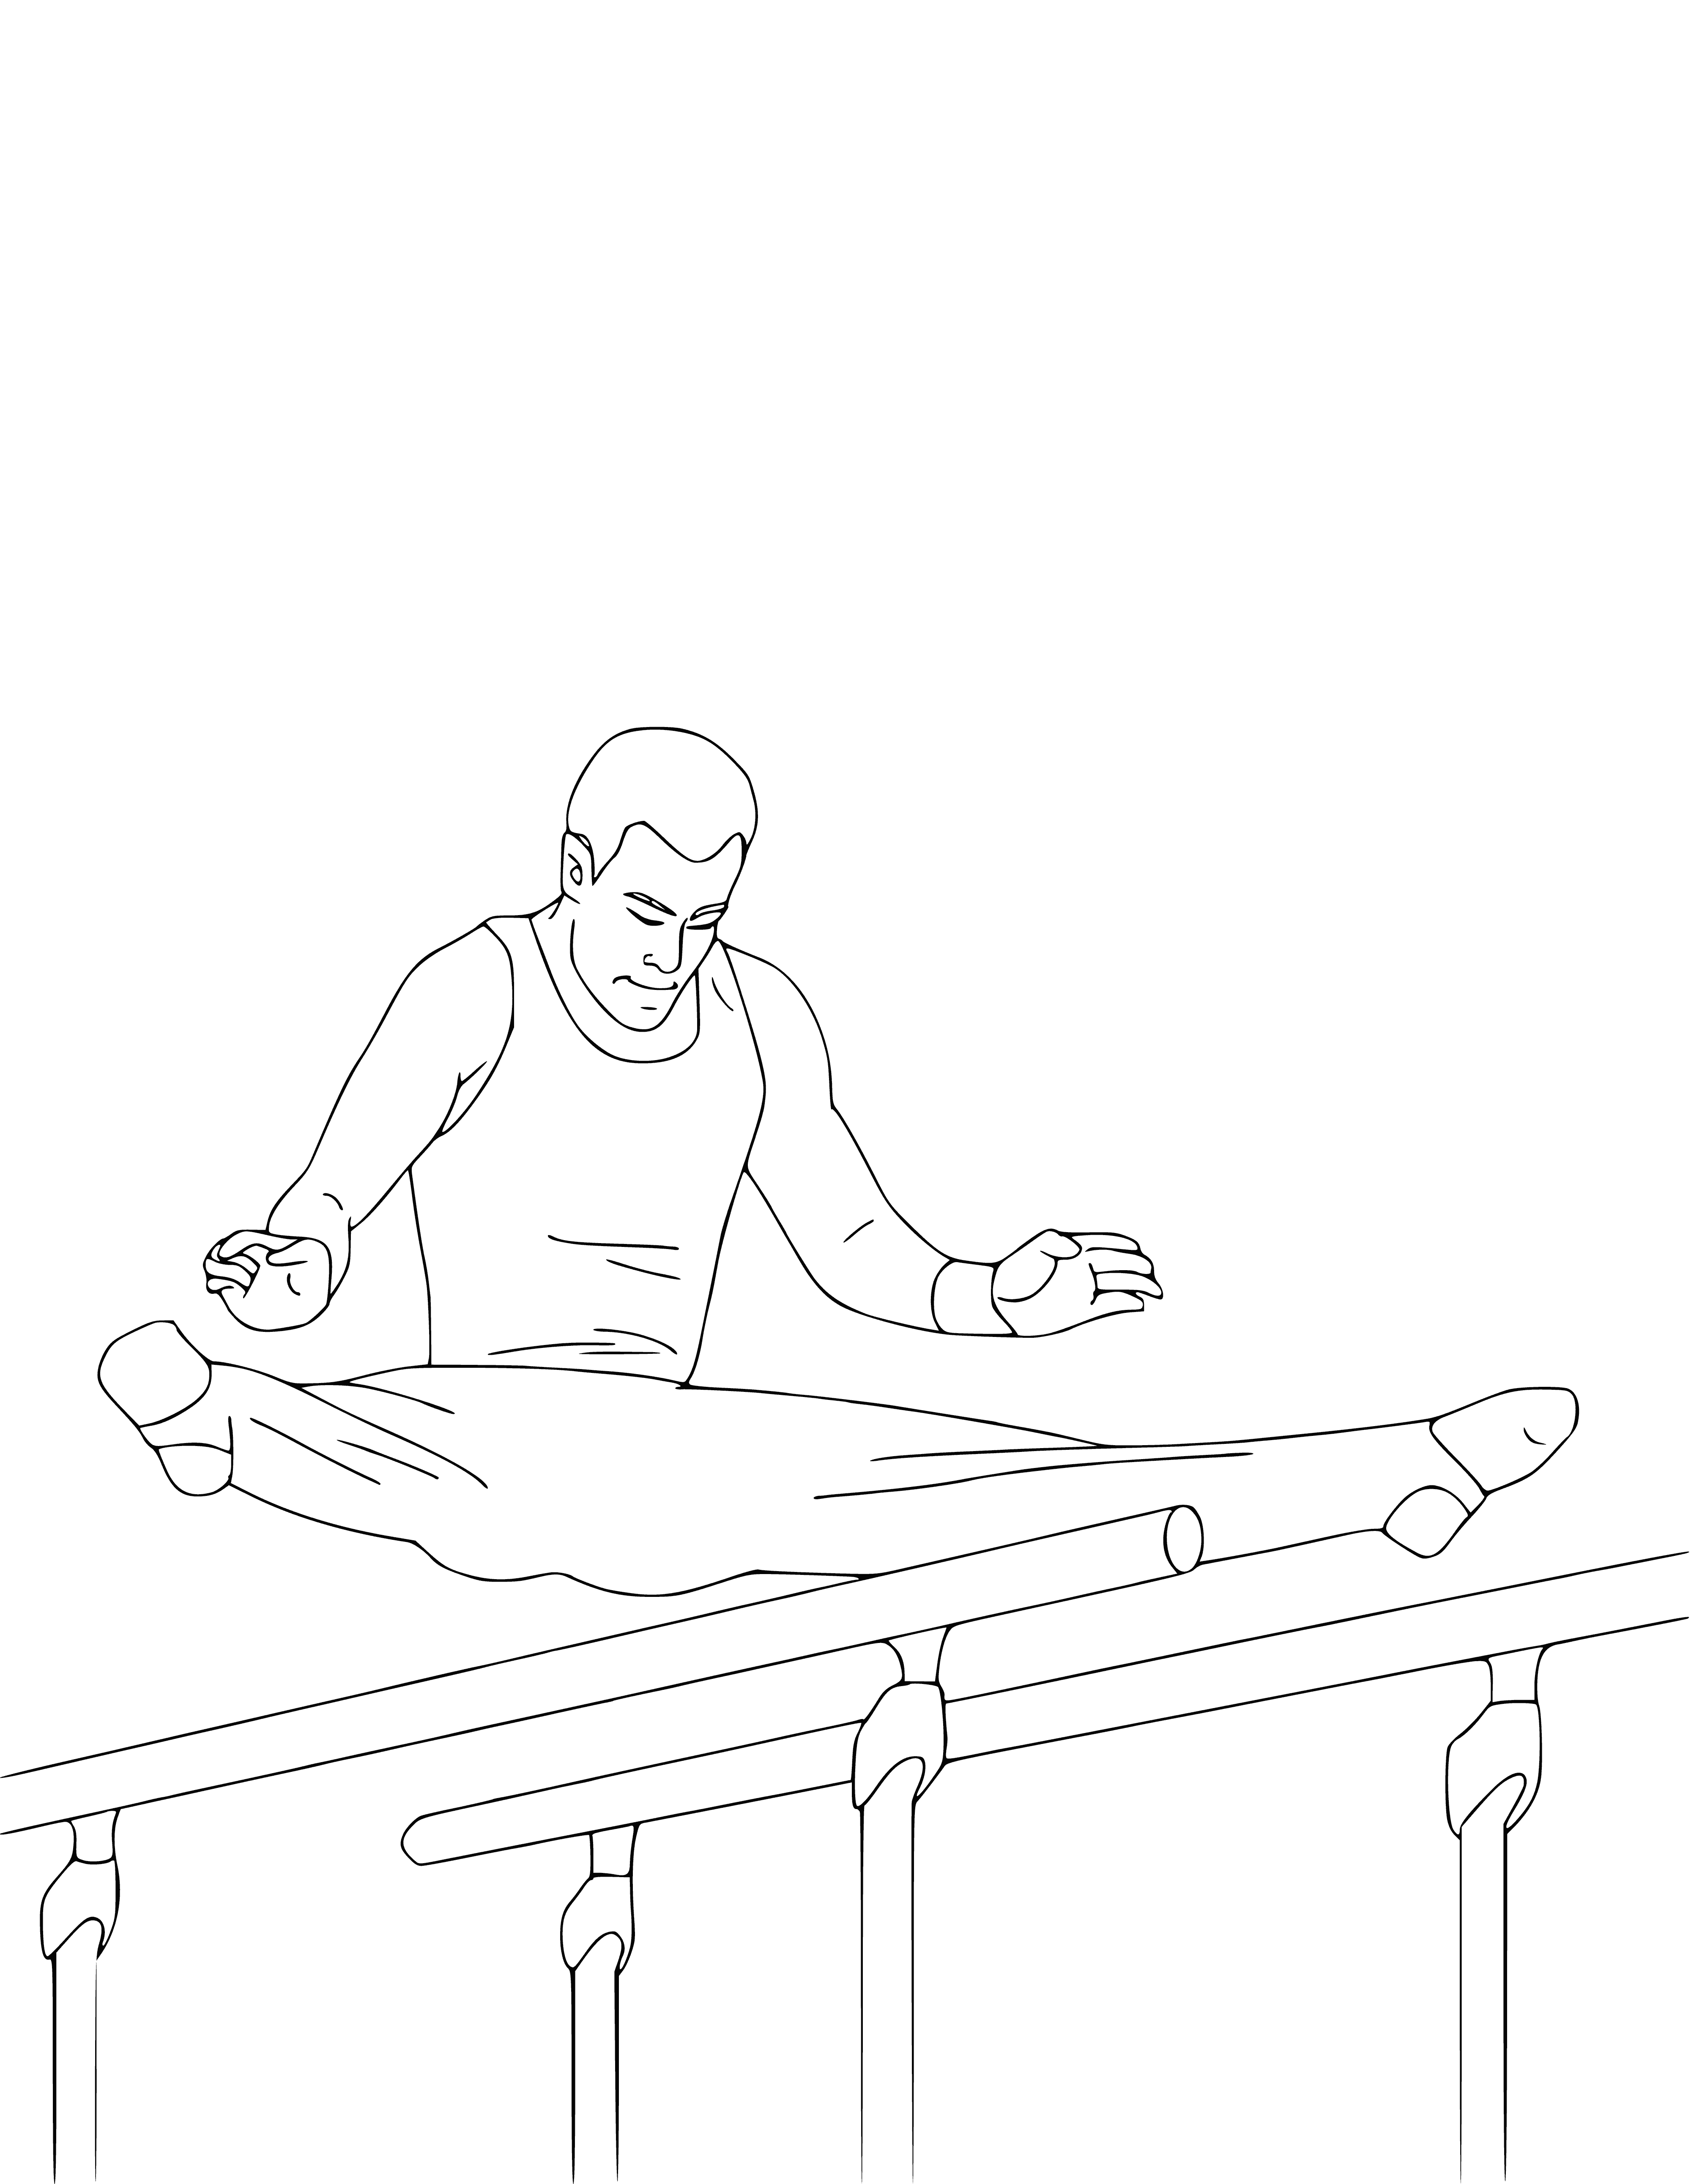 Gymnastics. Exercise on uneven bars coloring page